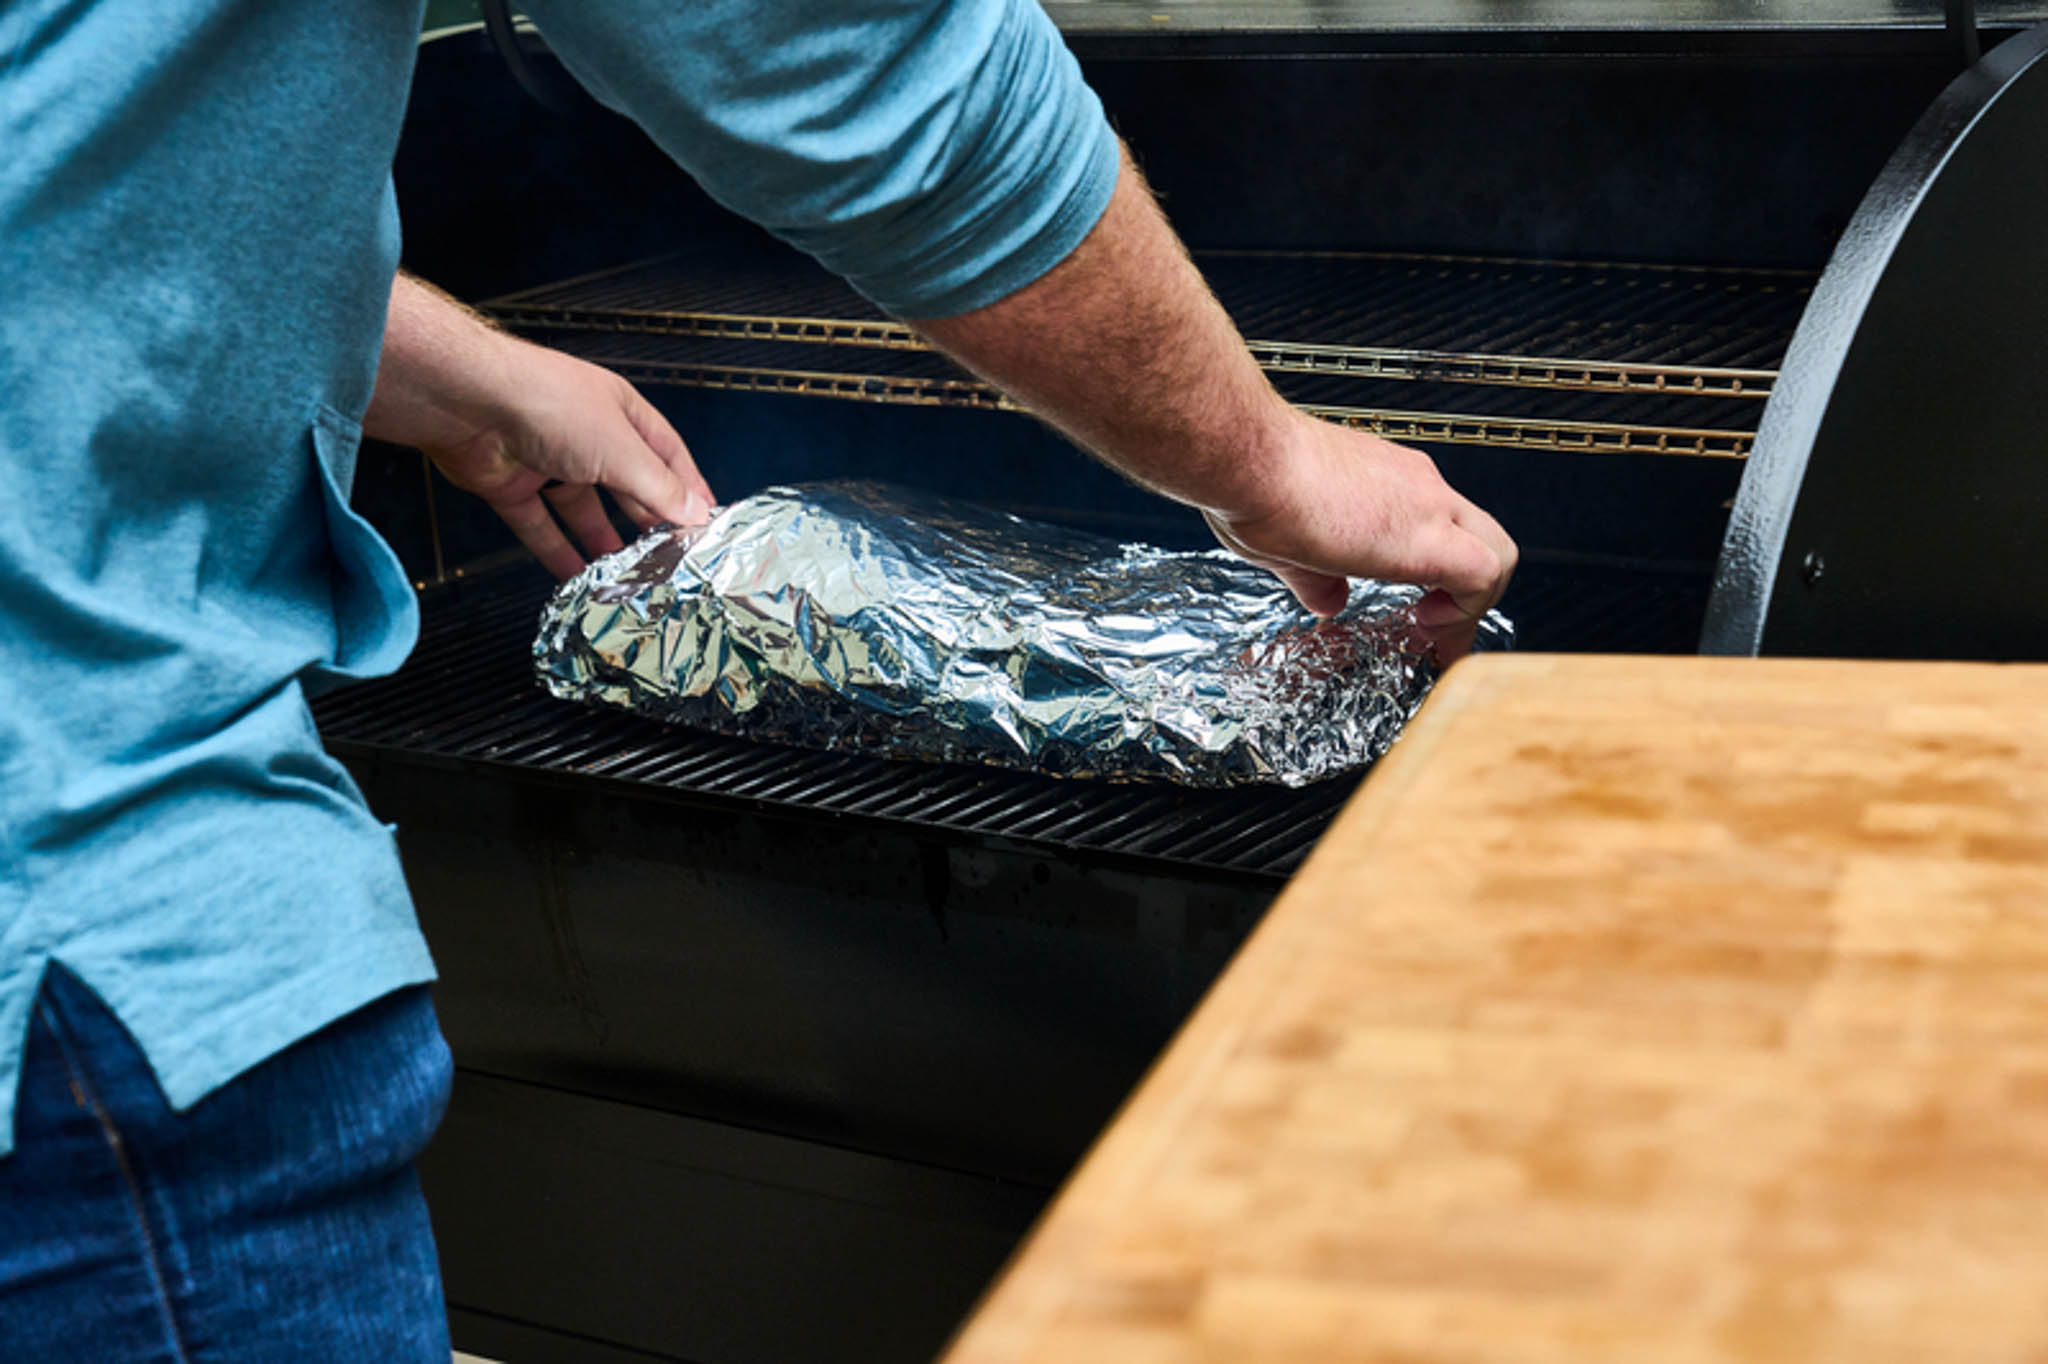 Placing foil-wrapped brisket on grill